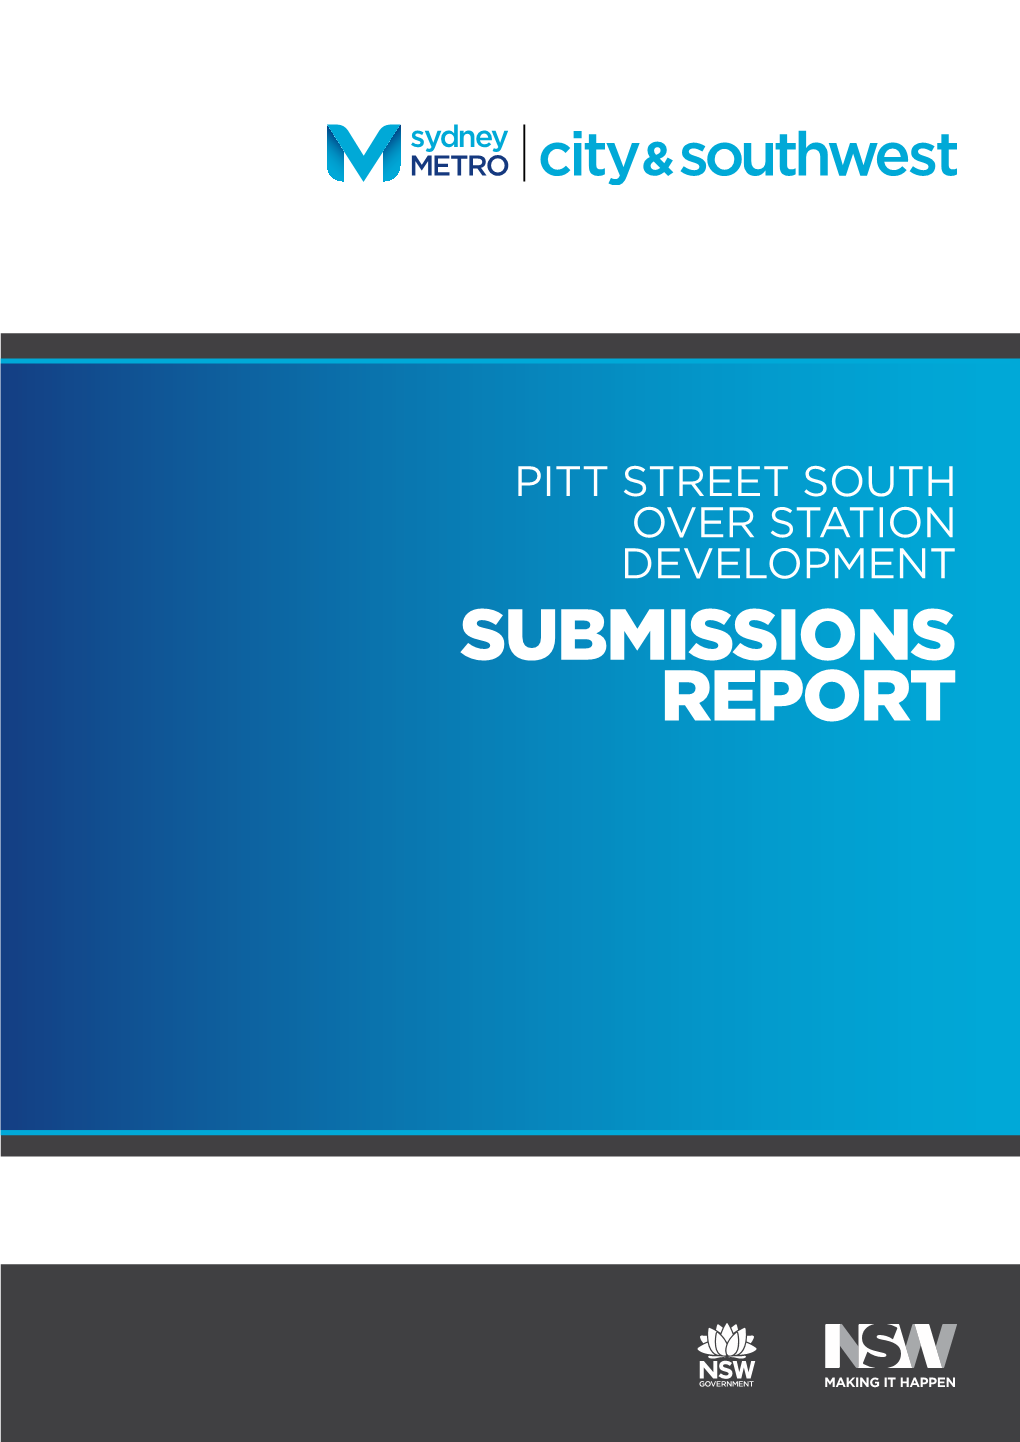 Pitt Street South Over Station Development Submissions Report